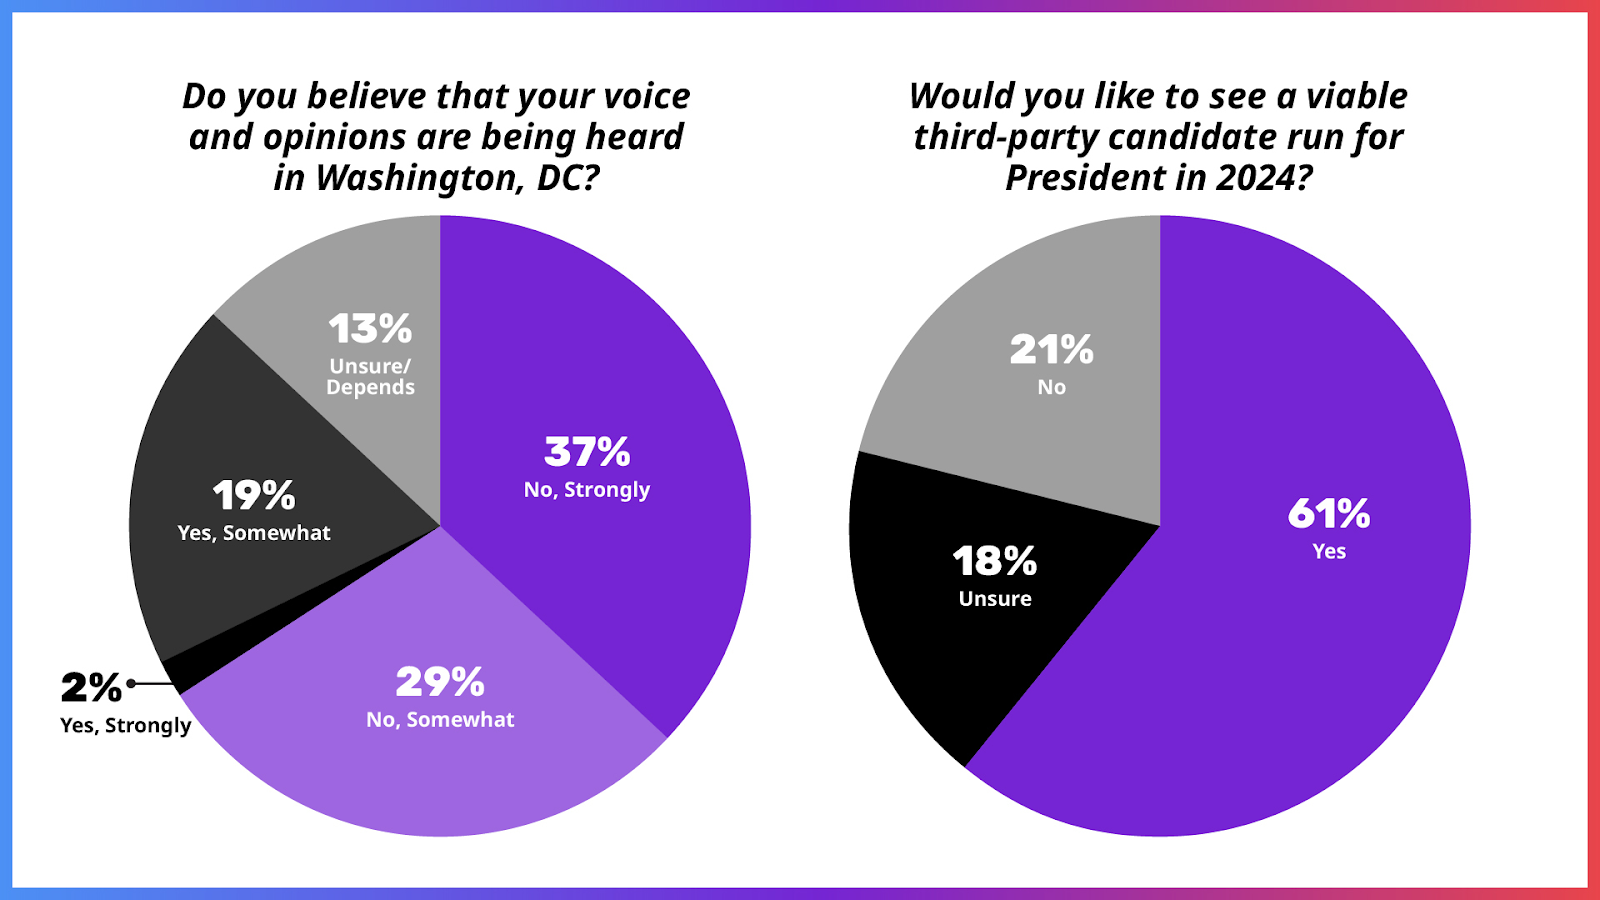 A pie chart divided into five segments showing the responses of independent voters to the question 'Do you believe that your voice and opinions are being heard in Washington, DC?' The largest segment is 'No, Strongly' at 37%, followed by 'No, Somewhat' at 29%, 'Yes, Somewhat' at 19%, 'Unsure/Depends' at 13%, and 'Yes, Strongly' at 2%. The chart has a purple and black color scheme.